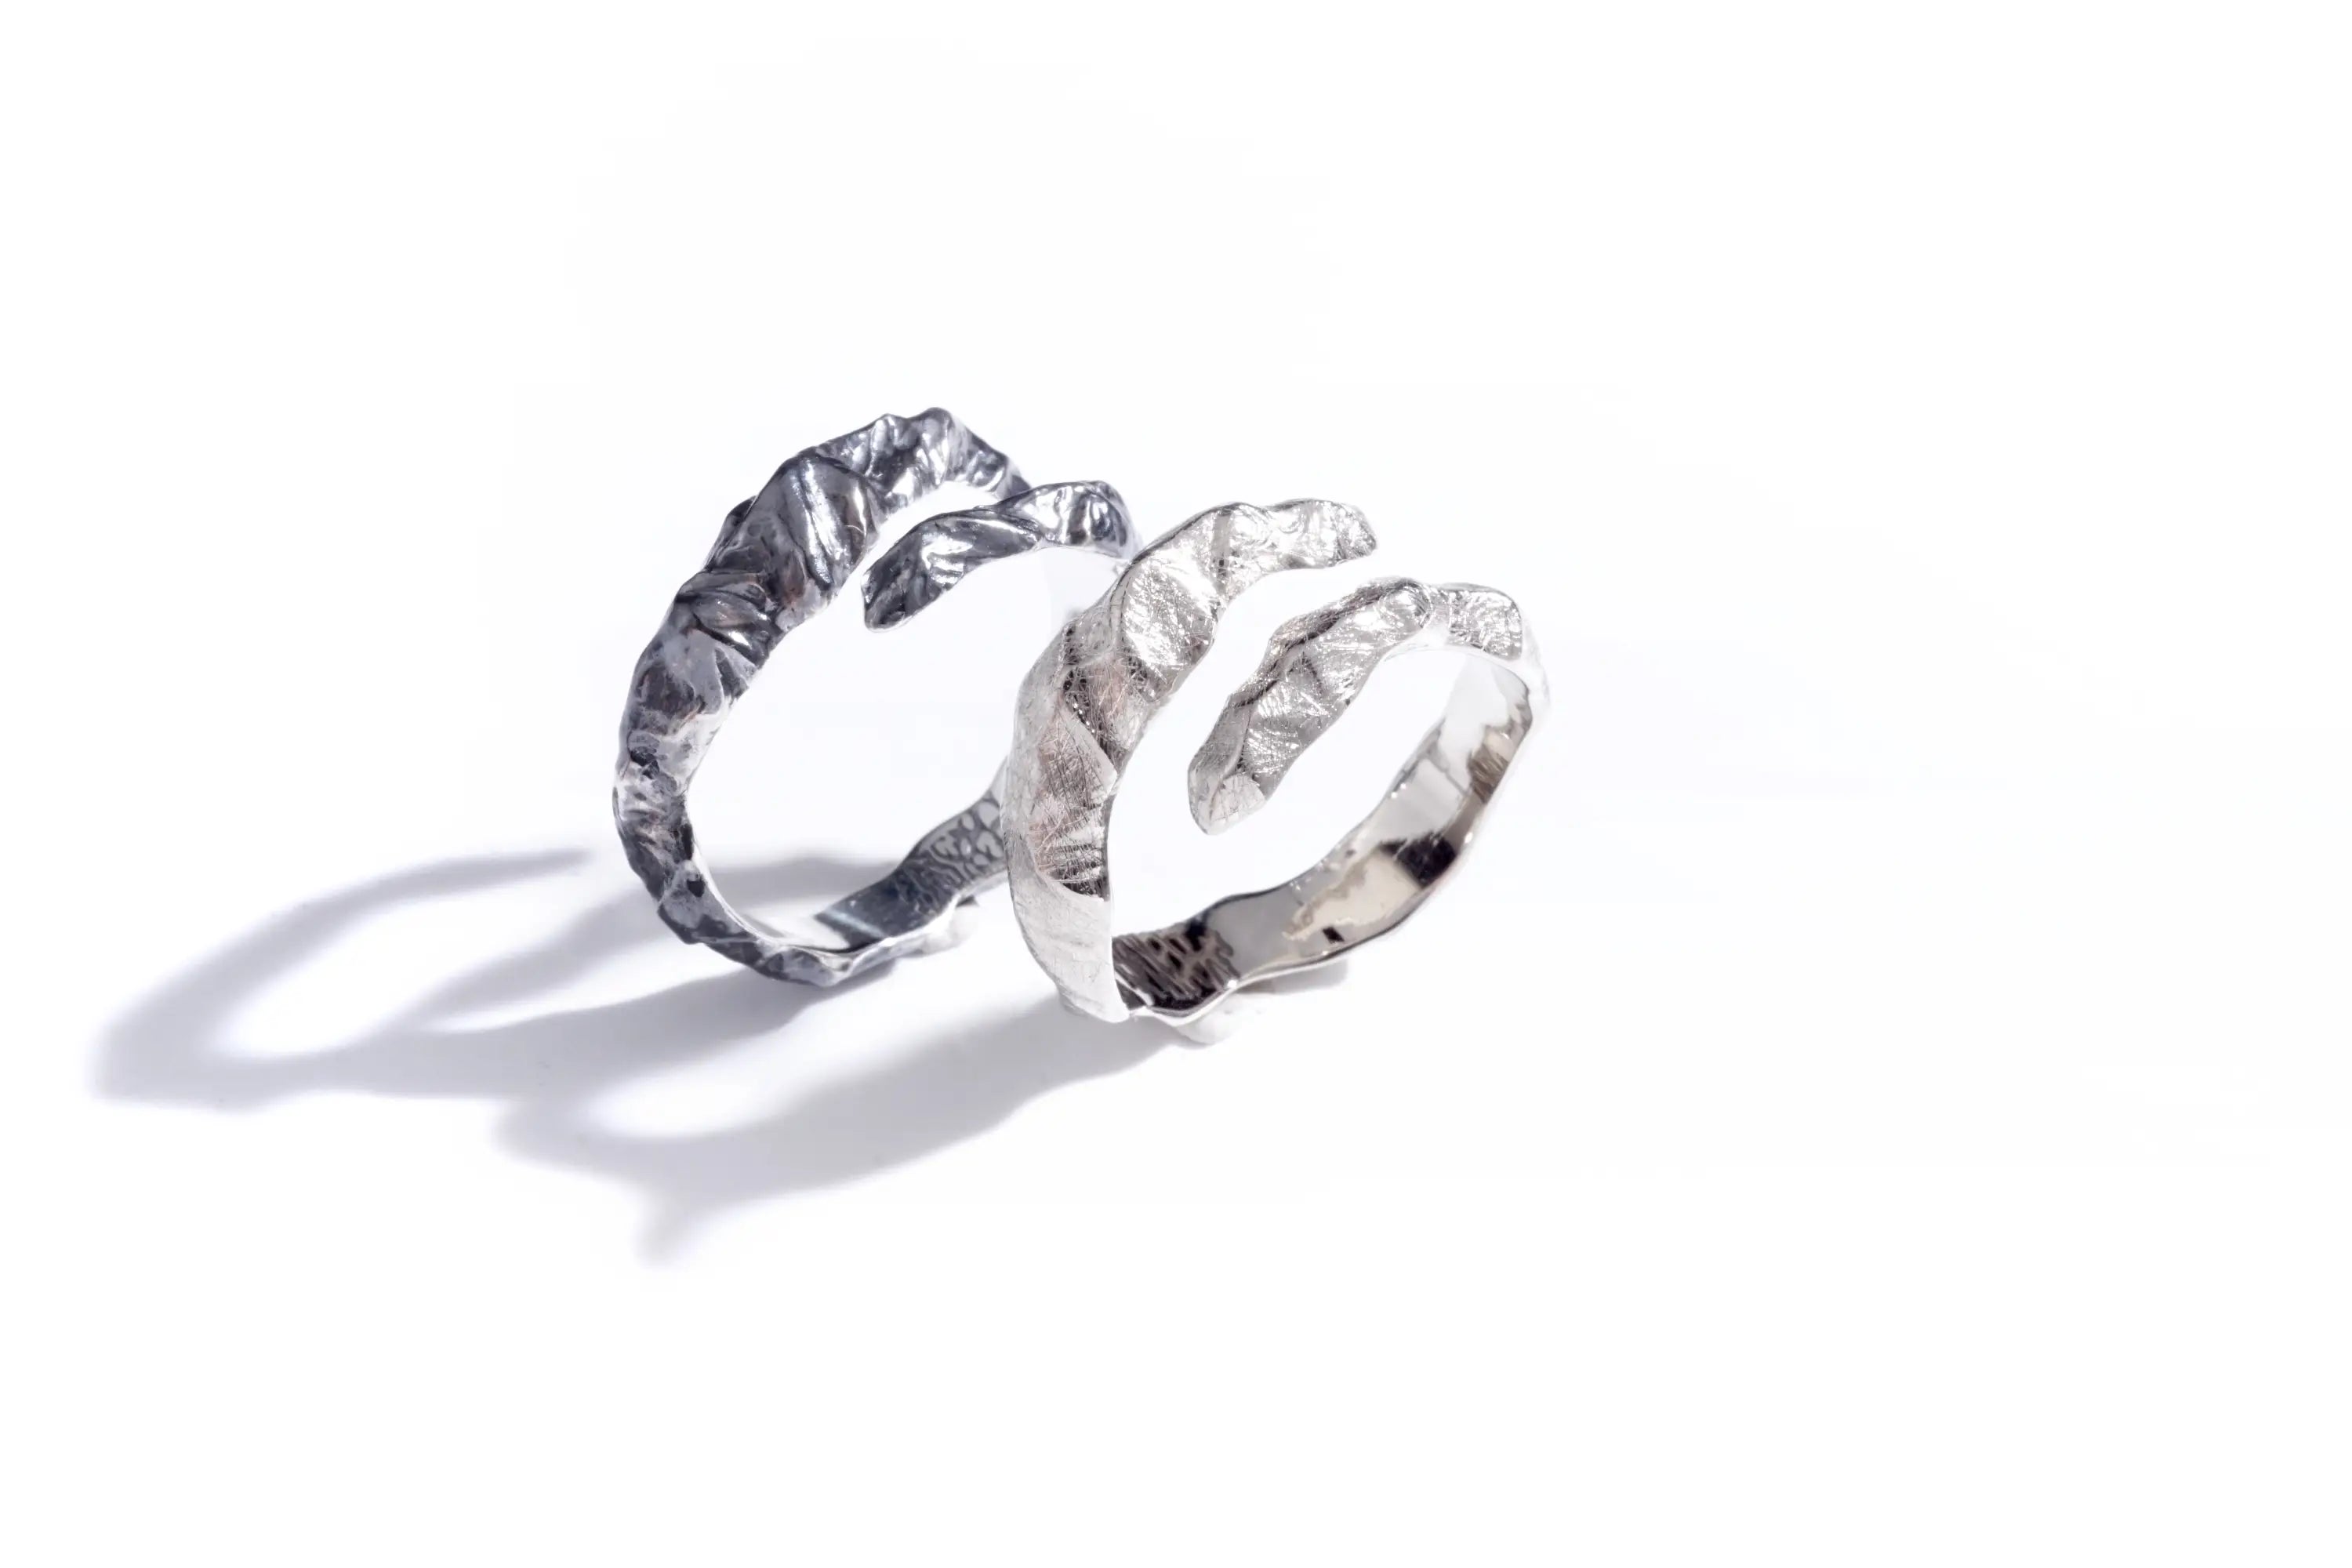 Chia Jewelry unique handmade custom wedding bands inspired by mountains.